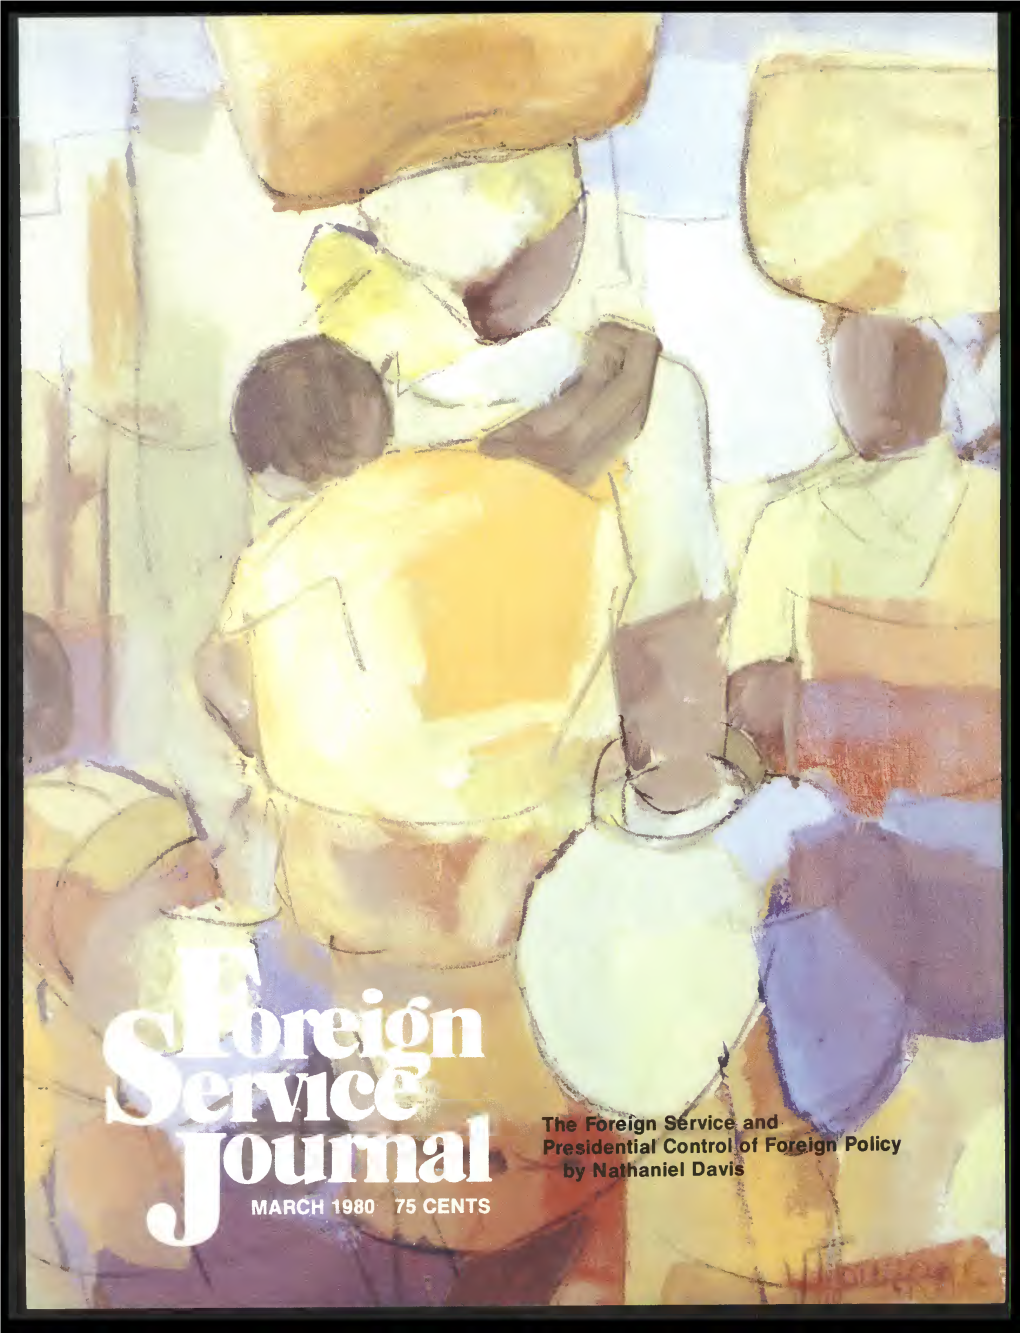 The Foreign Service Journal, March 1980